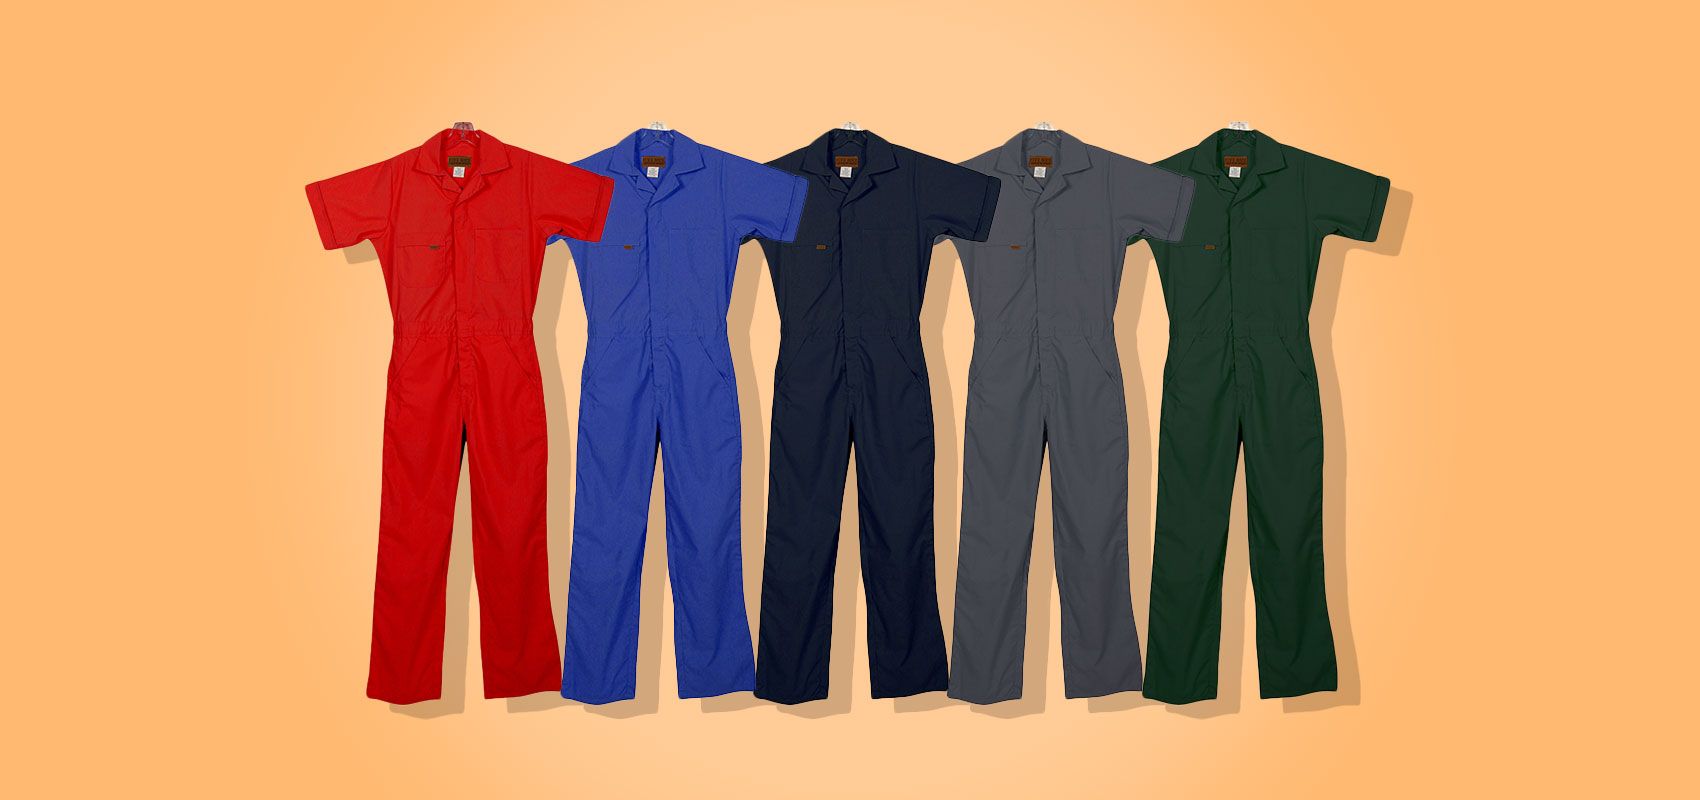 Overalls & Jumpsuits For Women